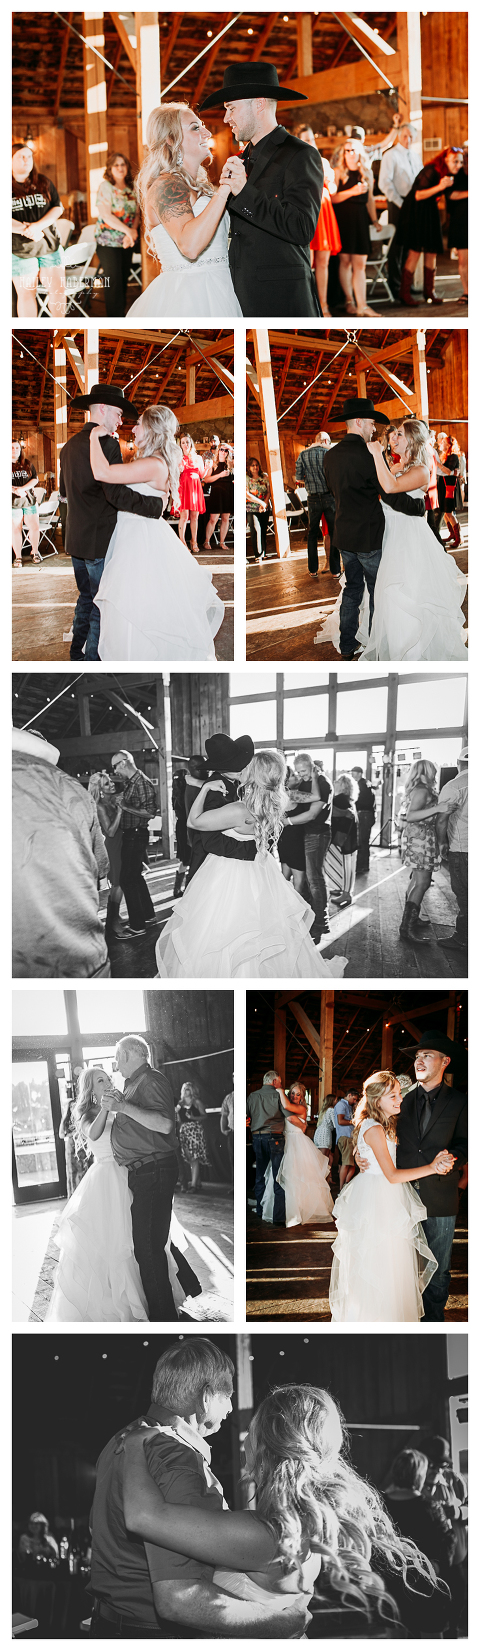 reception and couples dancing,Ryan and Amber married at The Cattle barn in Cle Elum, WA, photographed by Hailey Haberman Ellensburg Wedding Photographer